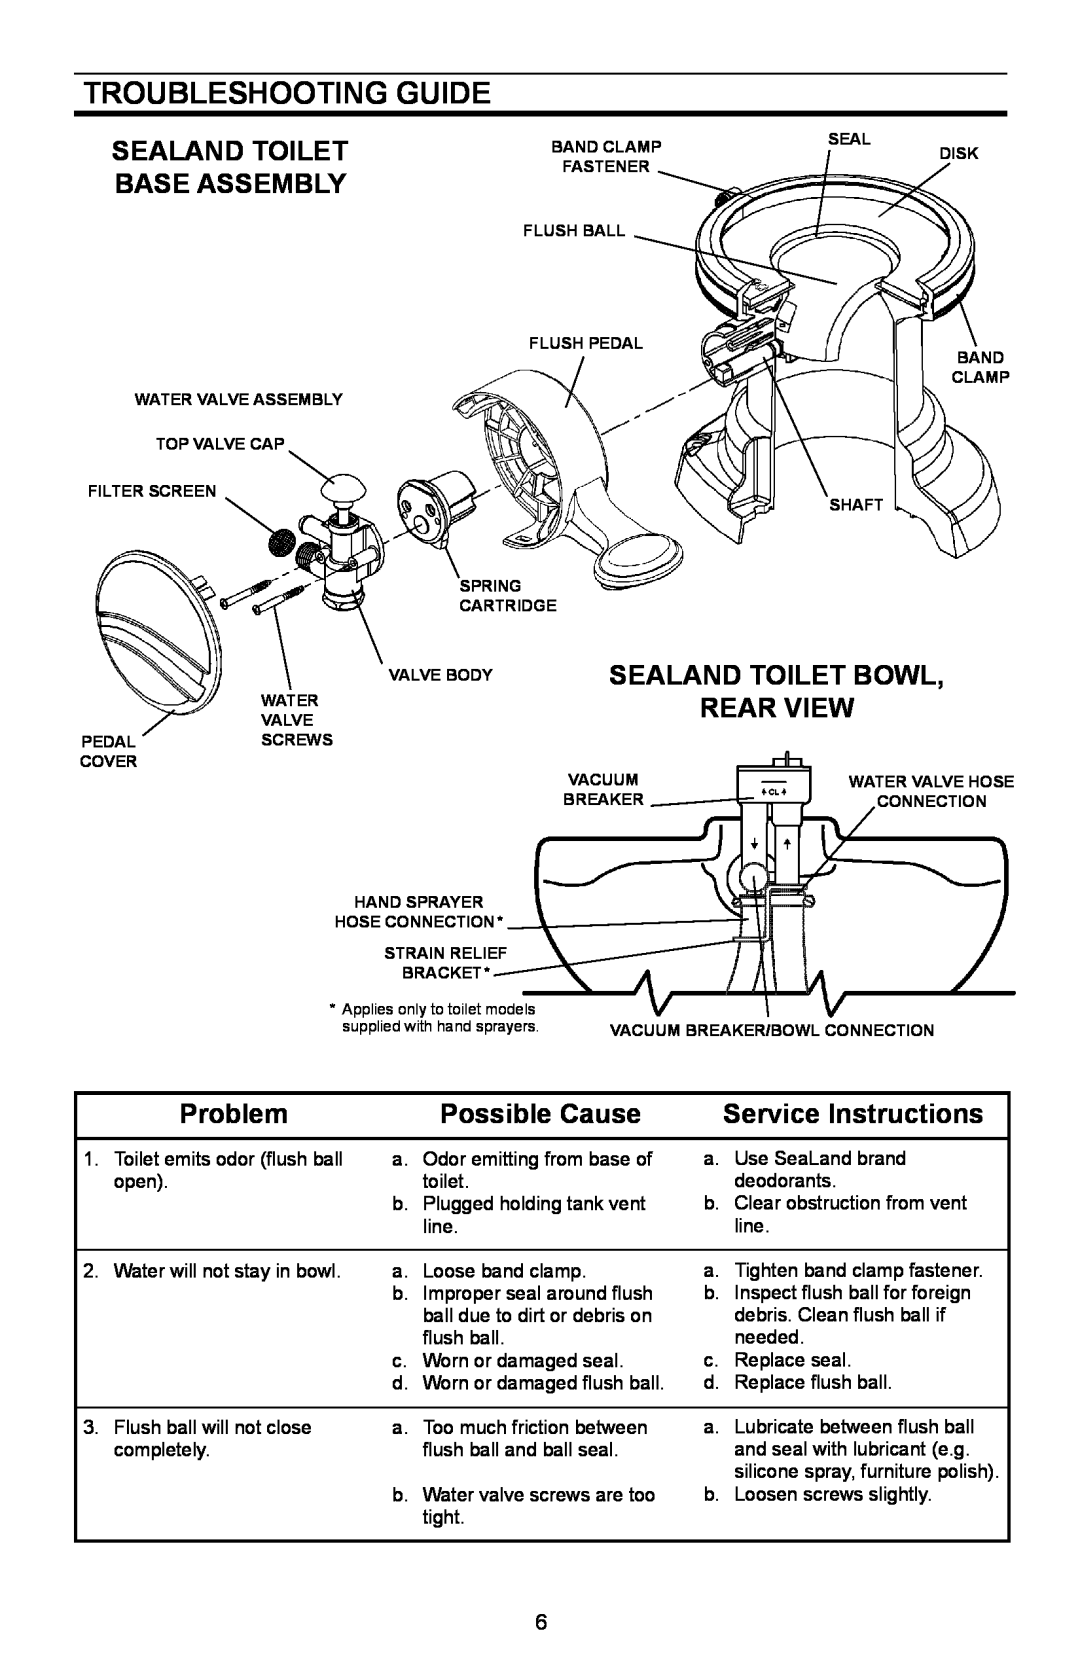 Dometic 110 Troubleshooting Guide, SeaLand TOILET, Base Assembly, Sealand Toilet Bowl, Rear View, Problem, possible Cause 